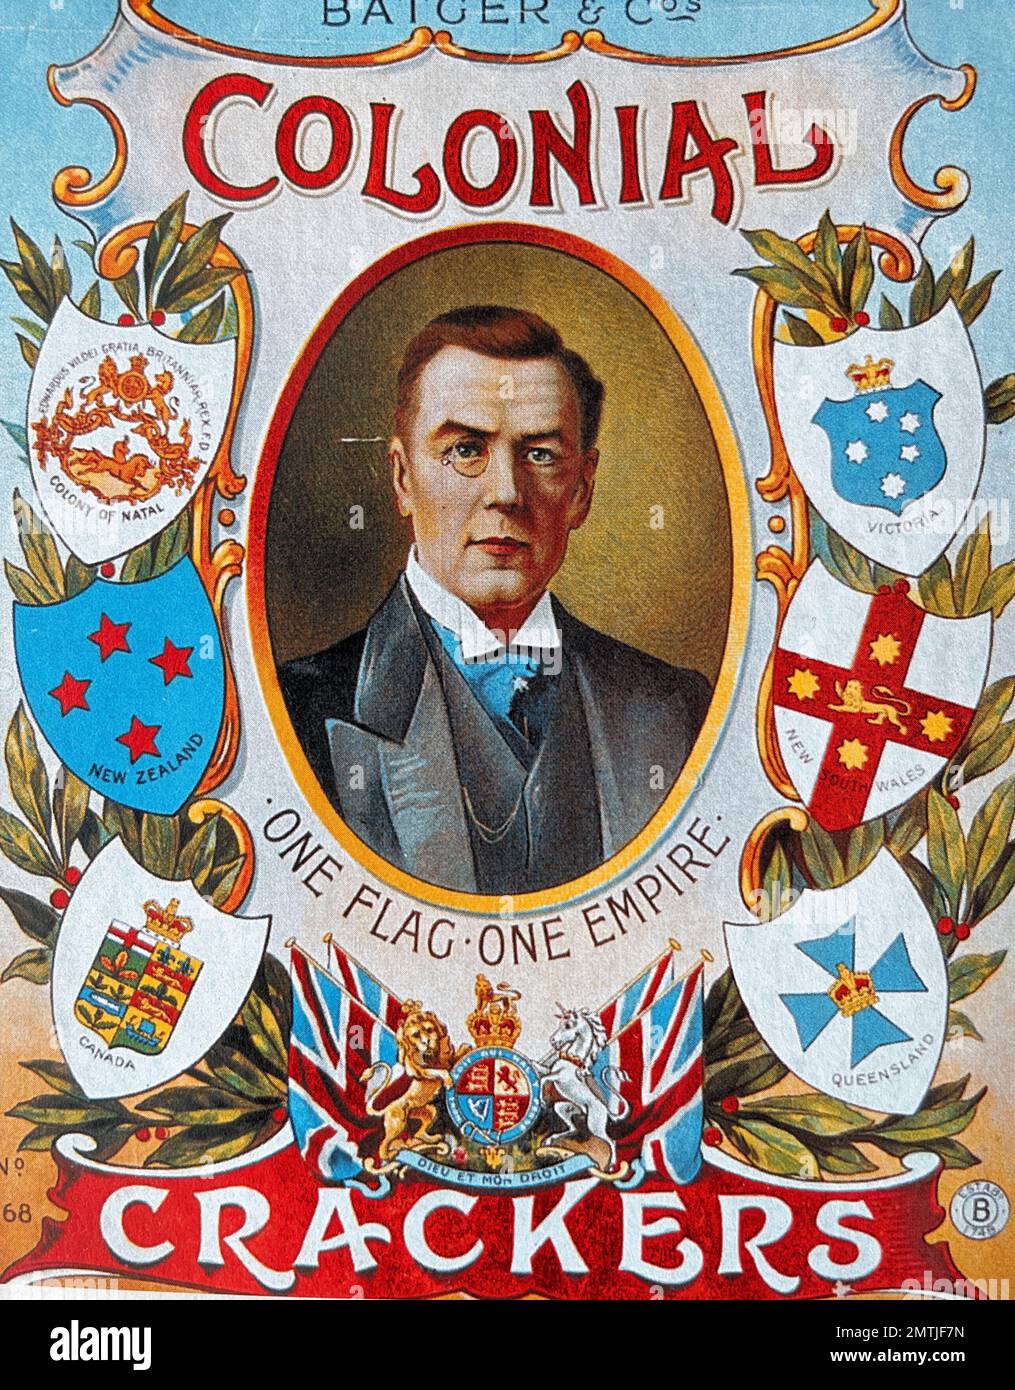 COLONIAL CRACKERS advert about 1905 with Joseph Chamberlain pictured Stock Photo